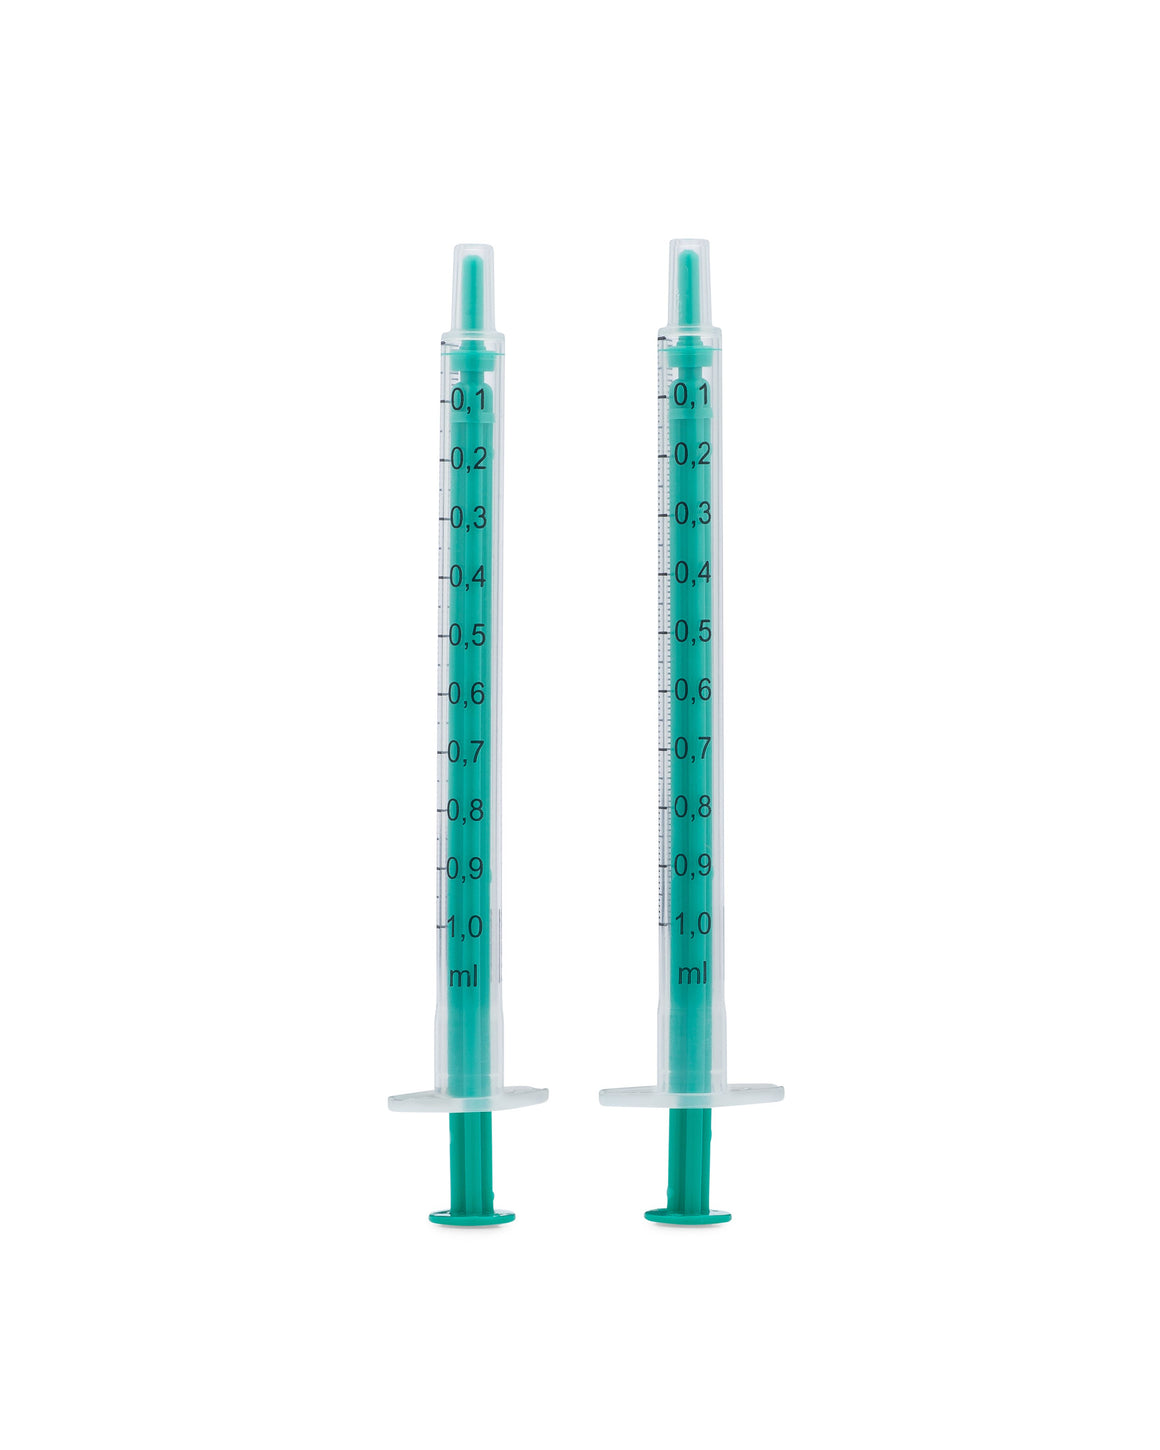 NORM-JECT Oral Dispenser, 1mL